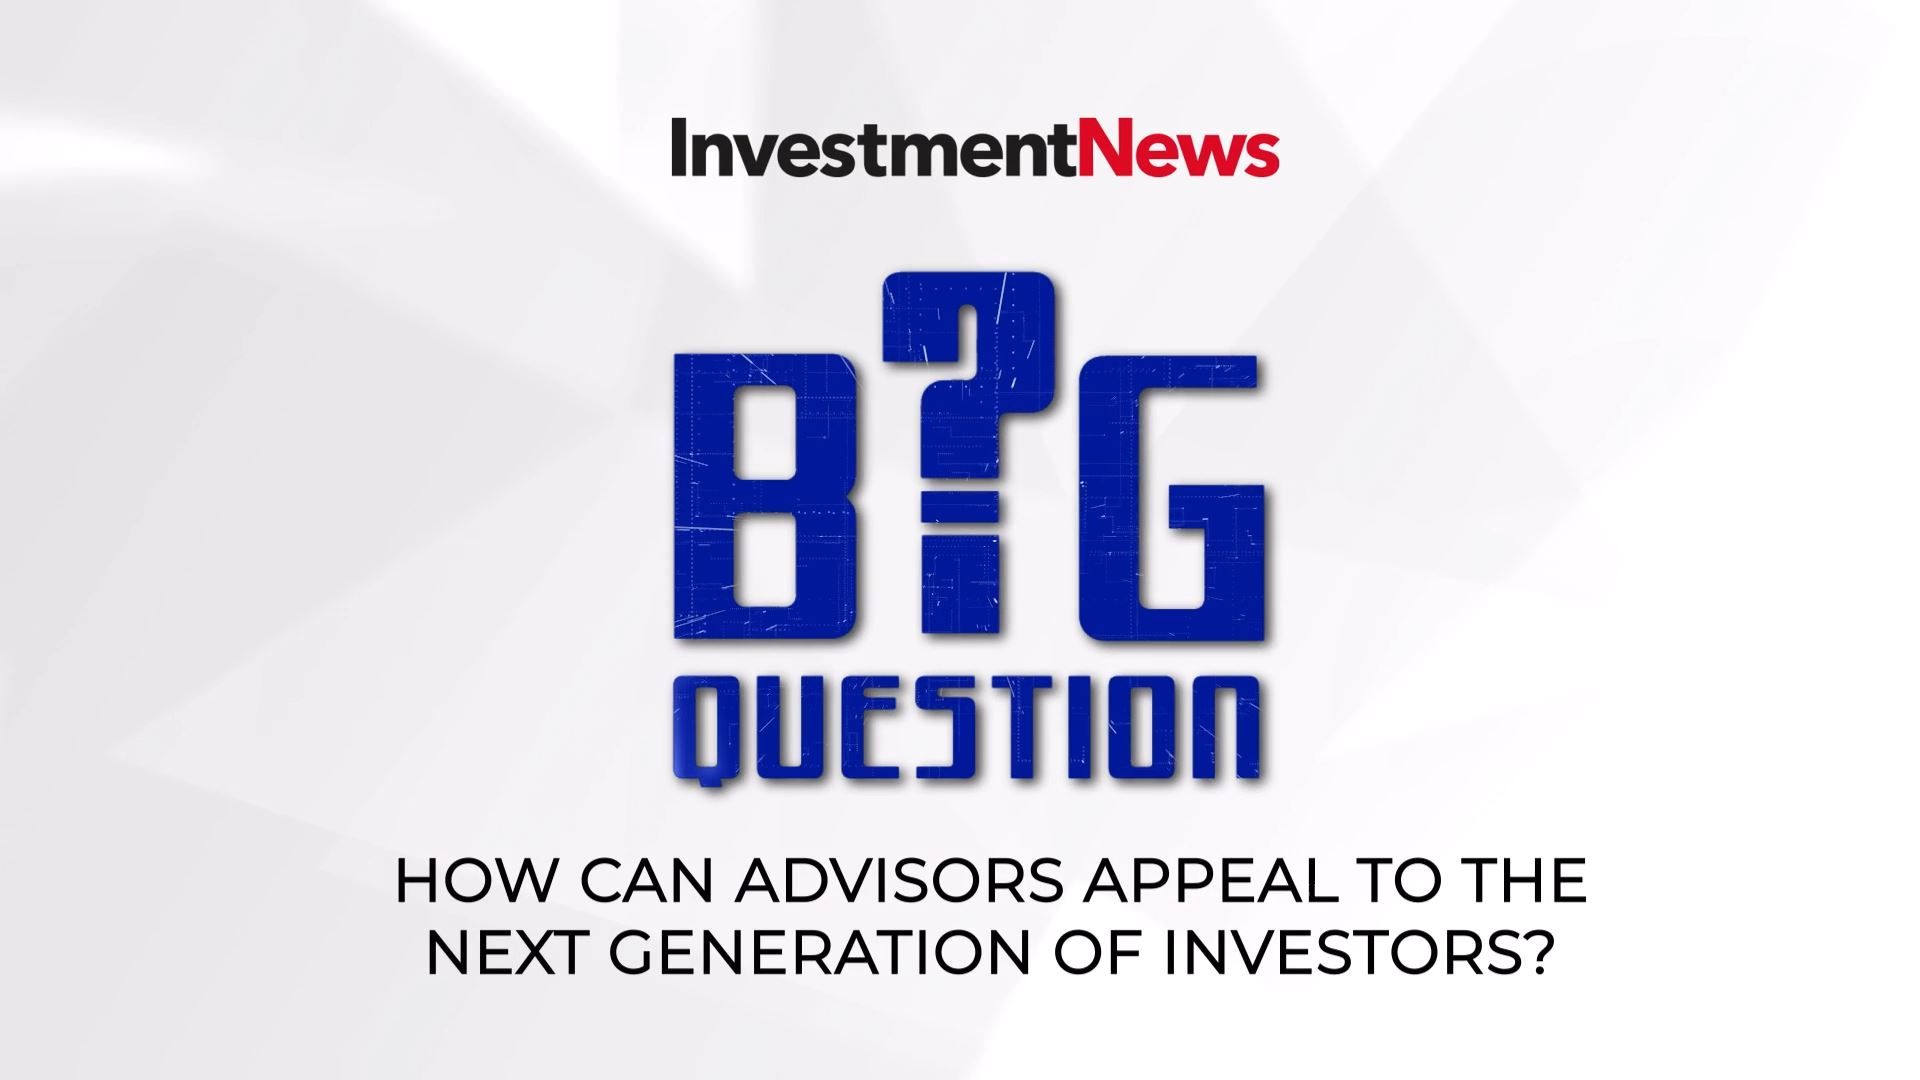 How can advisors appeal to the next generation of investors?